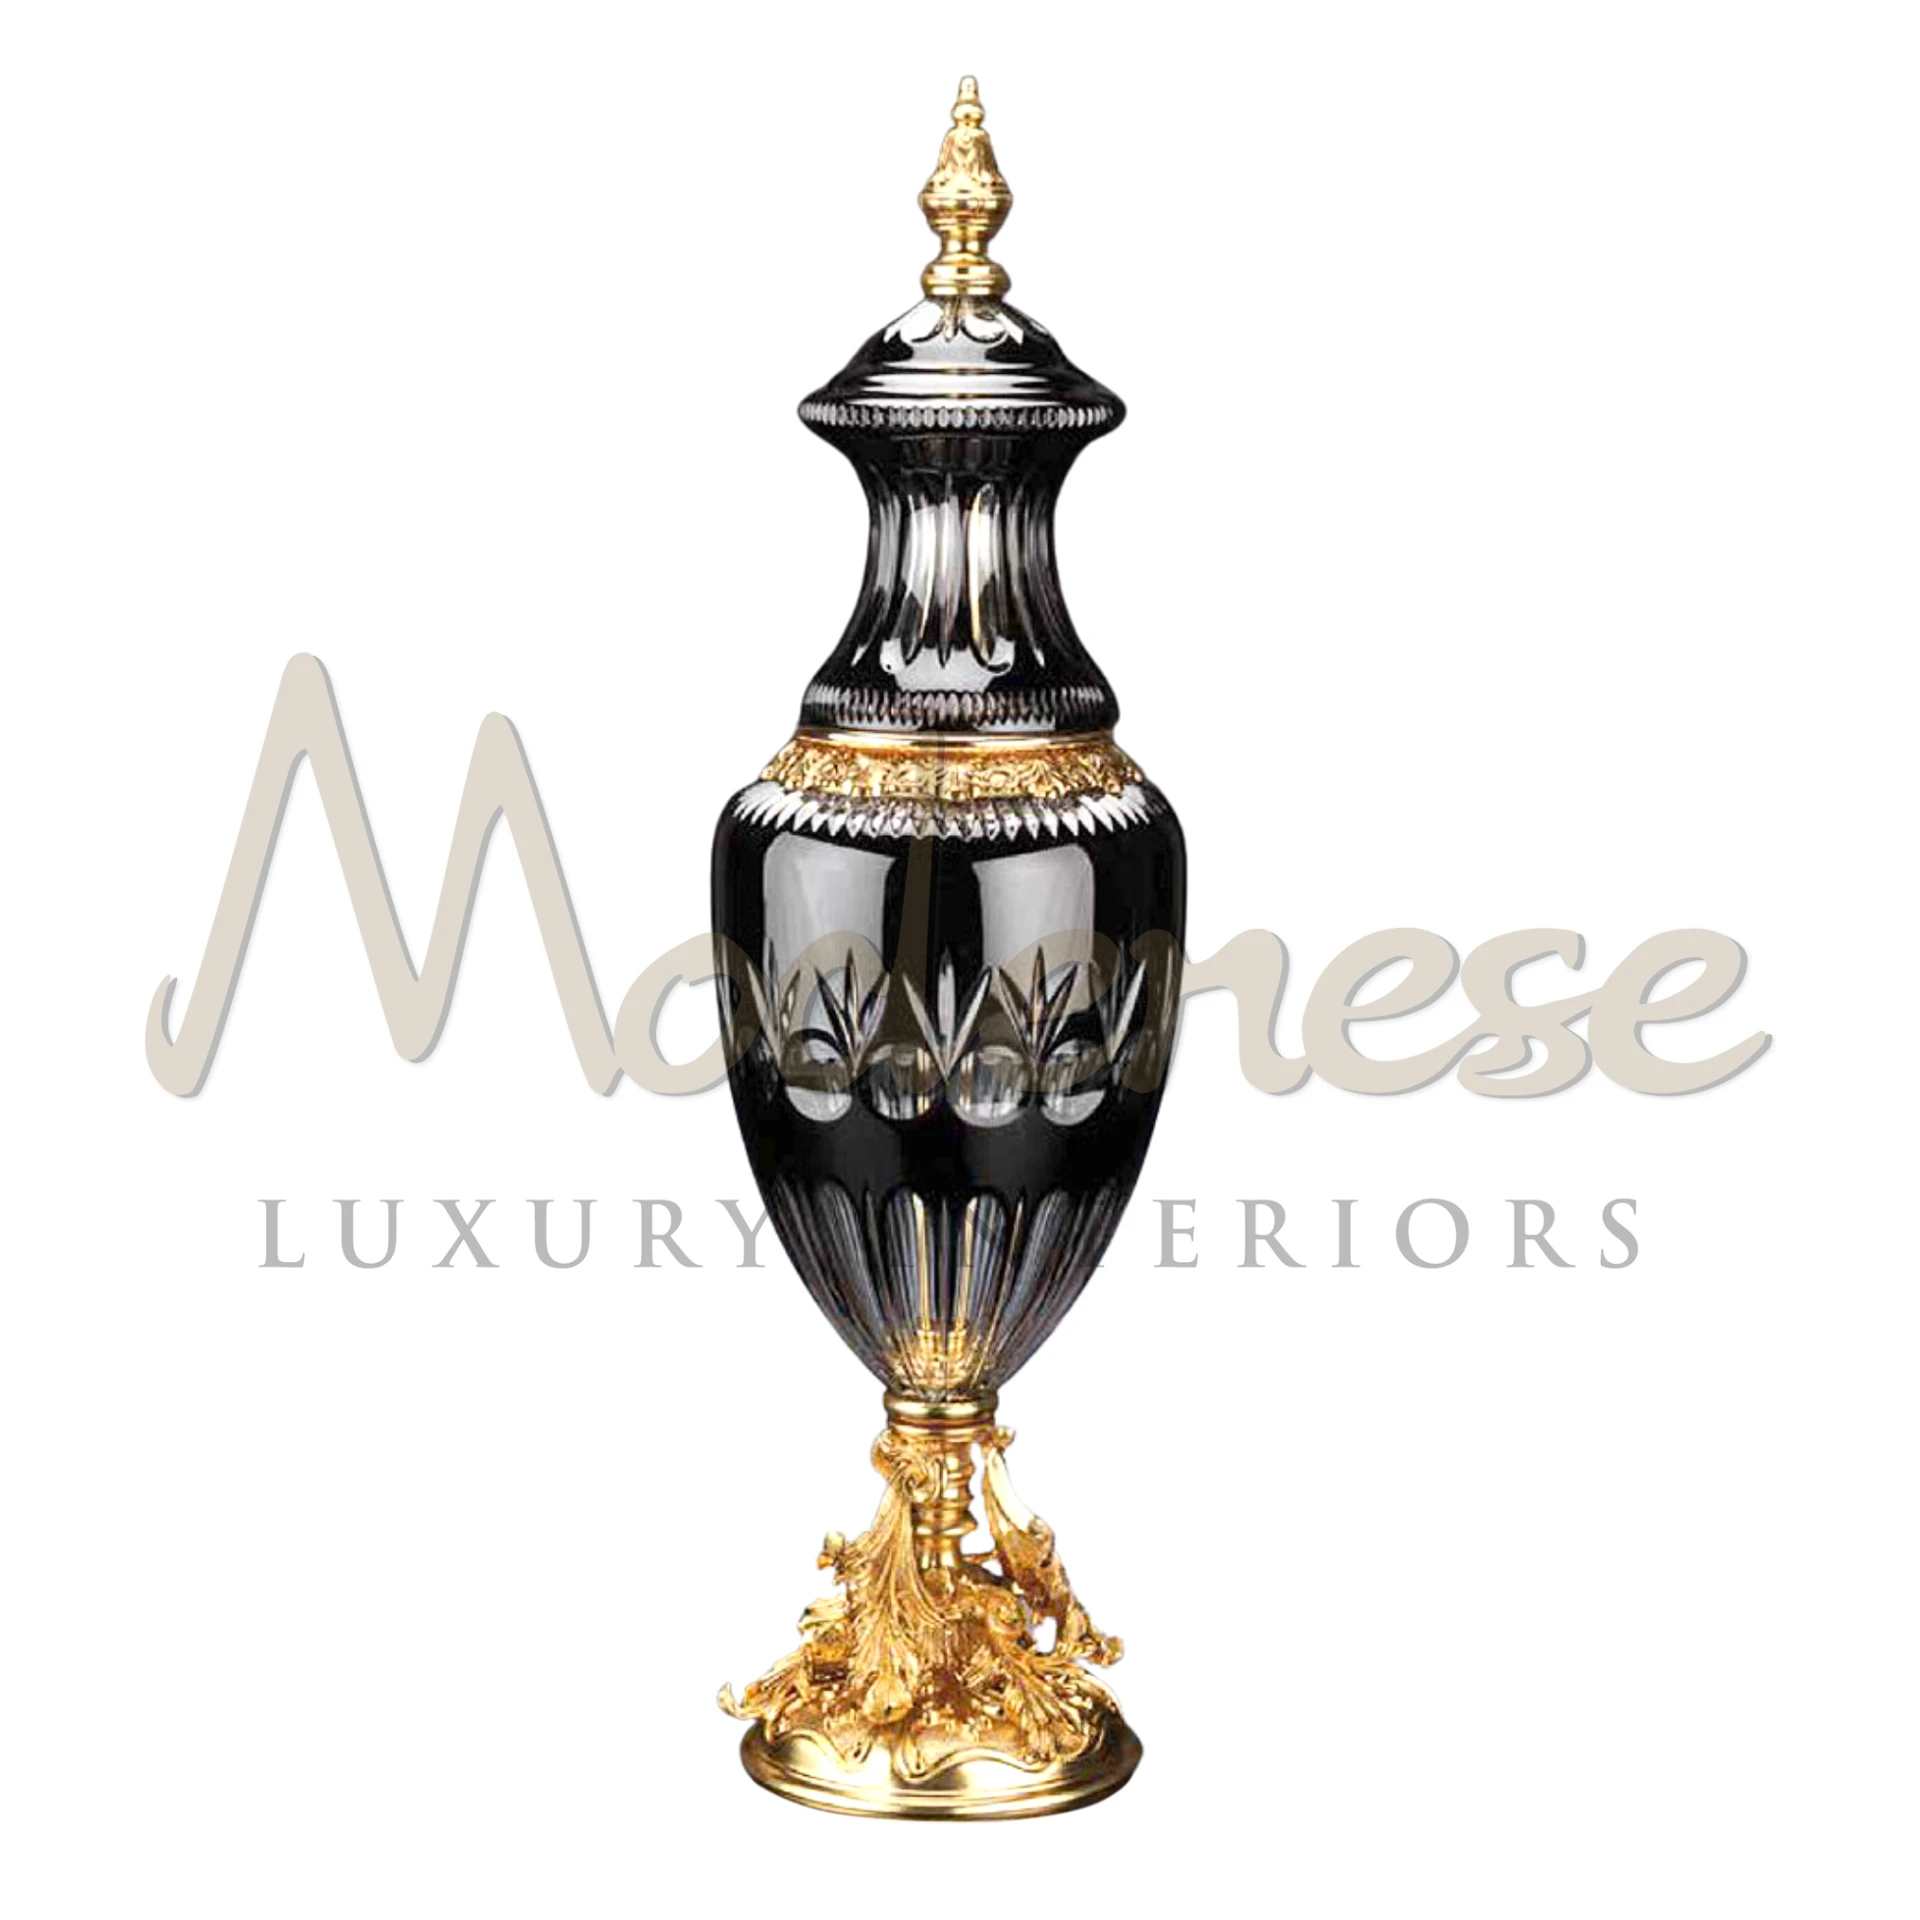 Classical Tall Black Amphora, with intricate patterns inspired by historical art, crafted in ceramic or porcelain, perfect for adding timeless elegance to luxury interiors.






